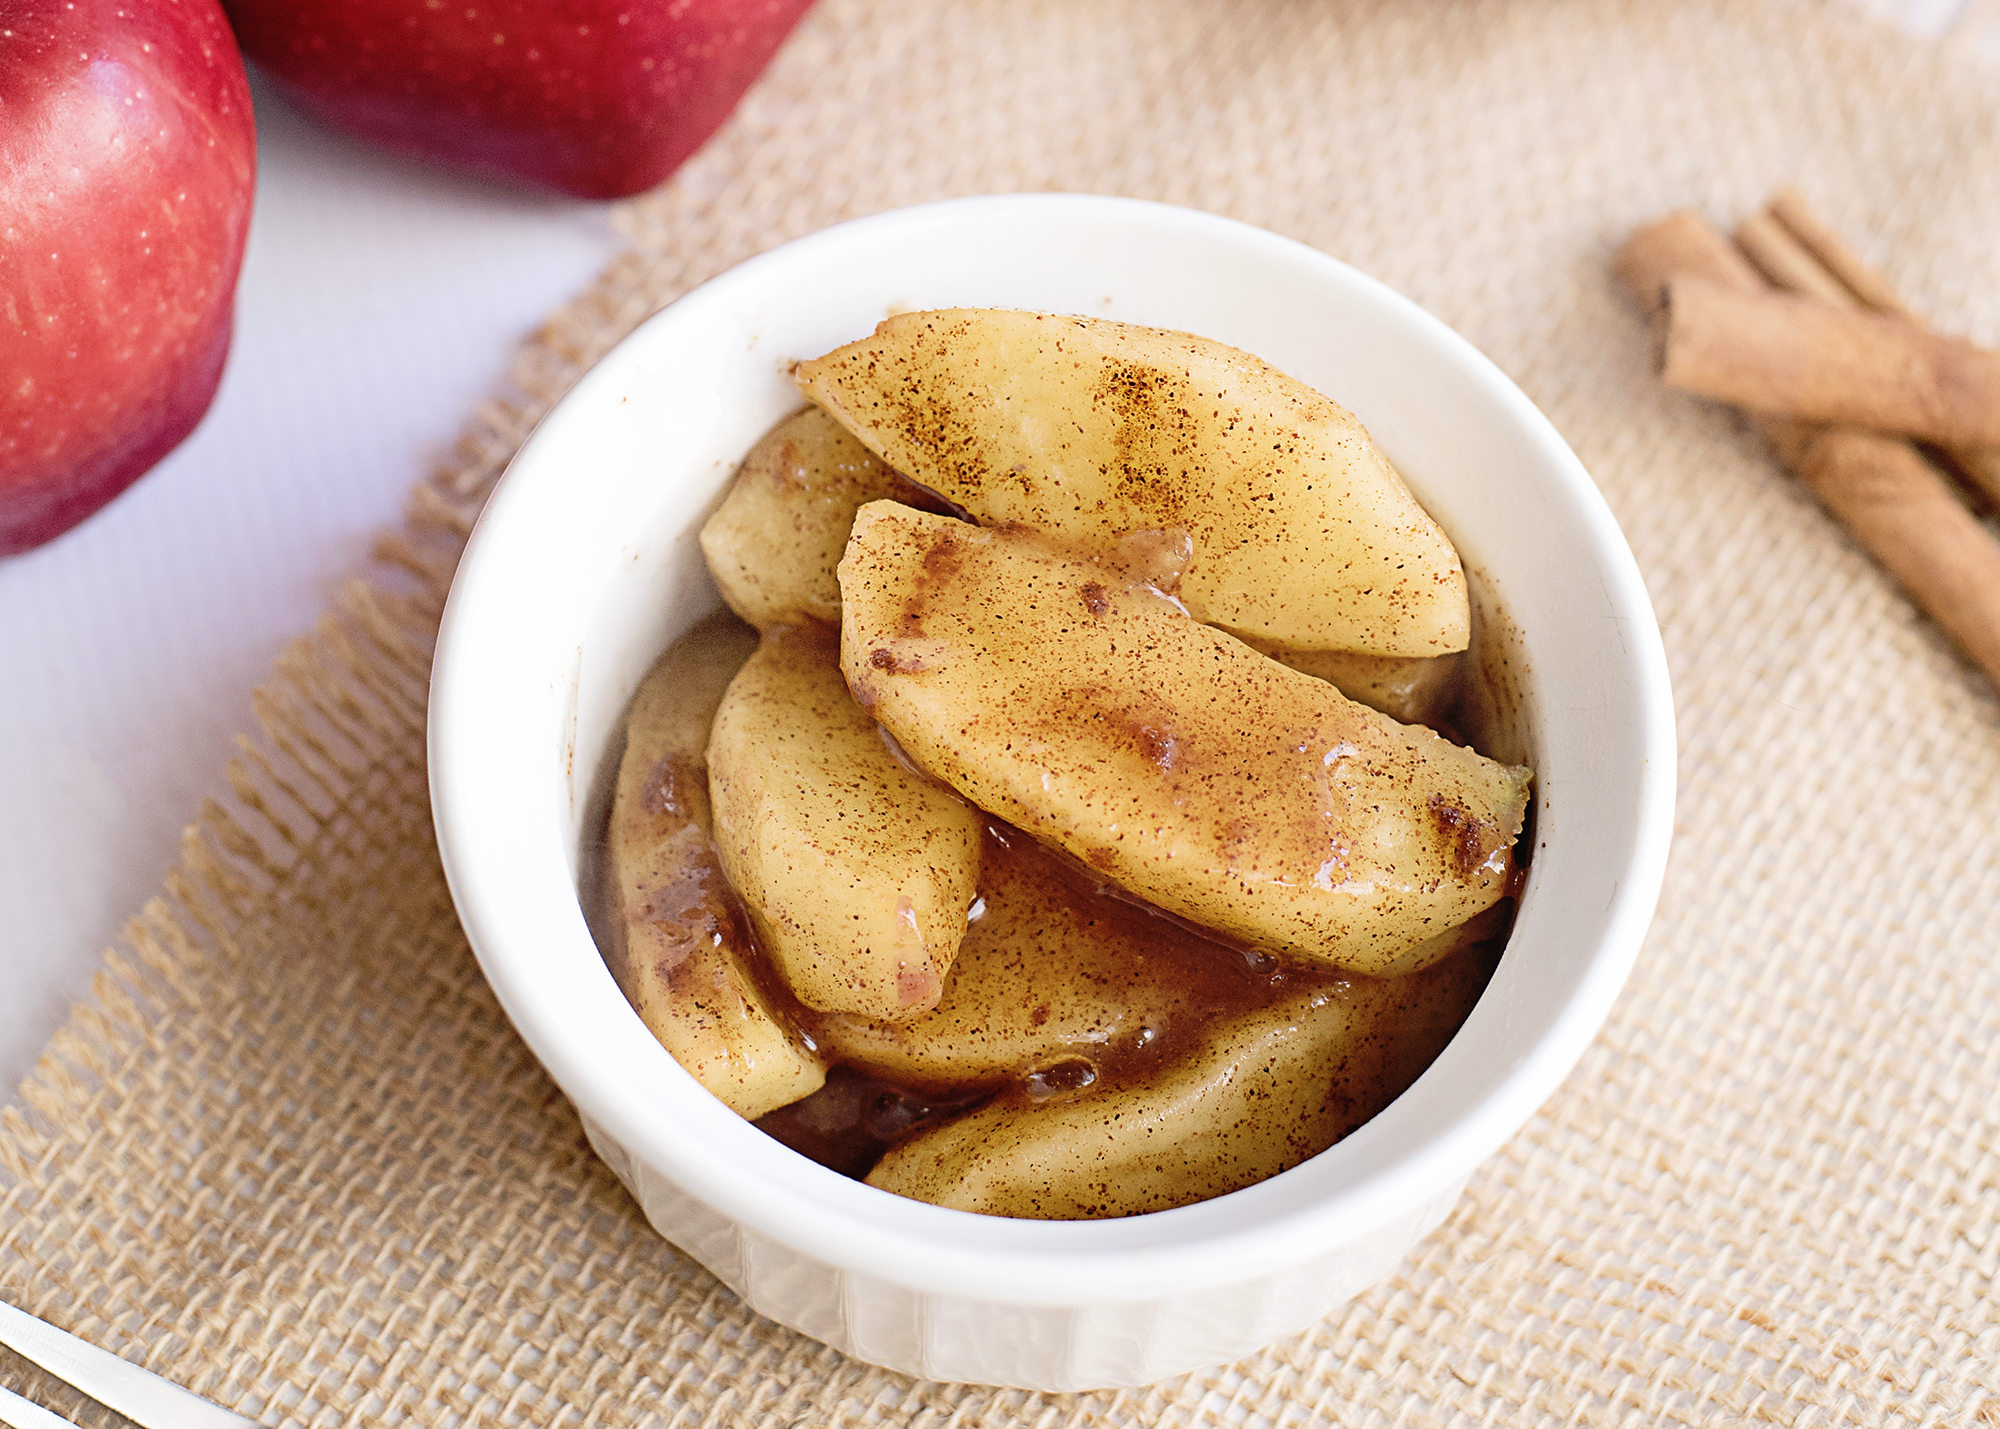 Looking for an easy baked apple recipe? This recipe can be whipped in the microwave and will become a favorite at 0 Weight Watchers Freestyle Points! Perfect on Weight Watchers or any other low calorie diet.